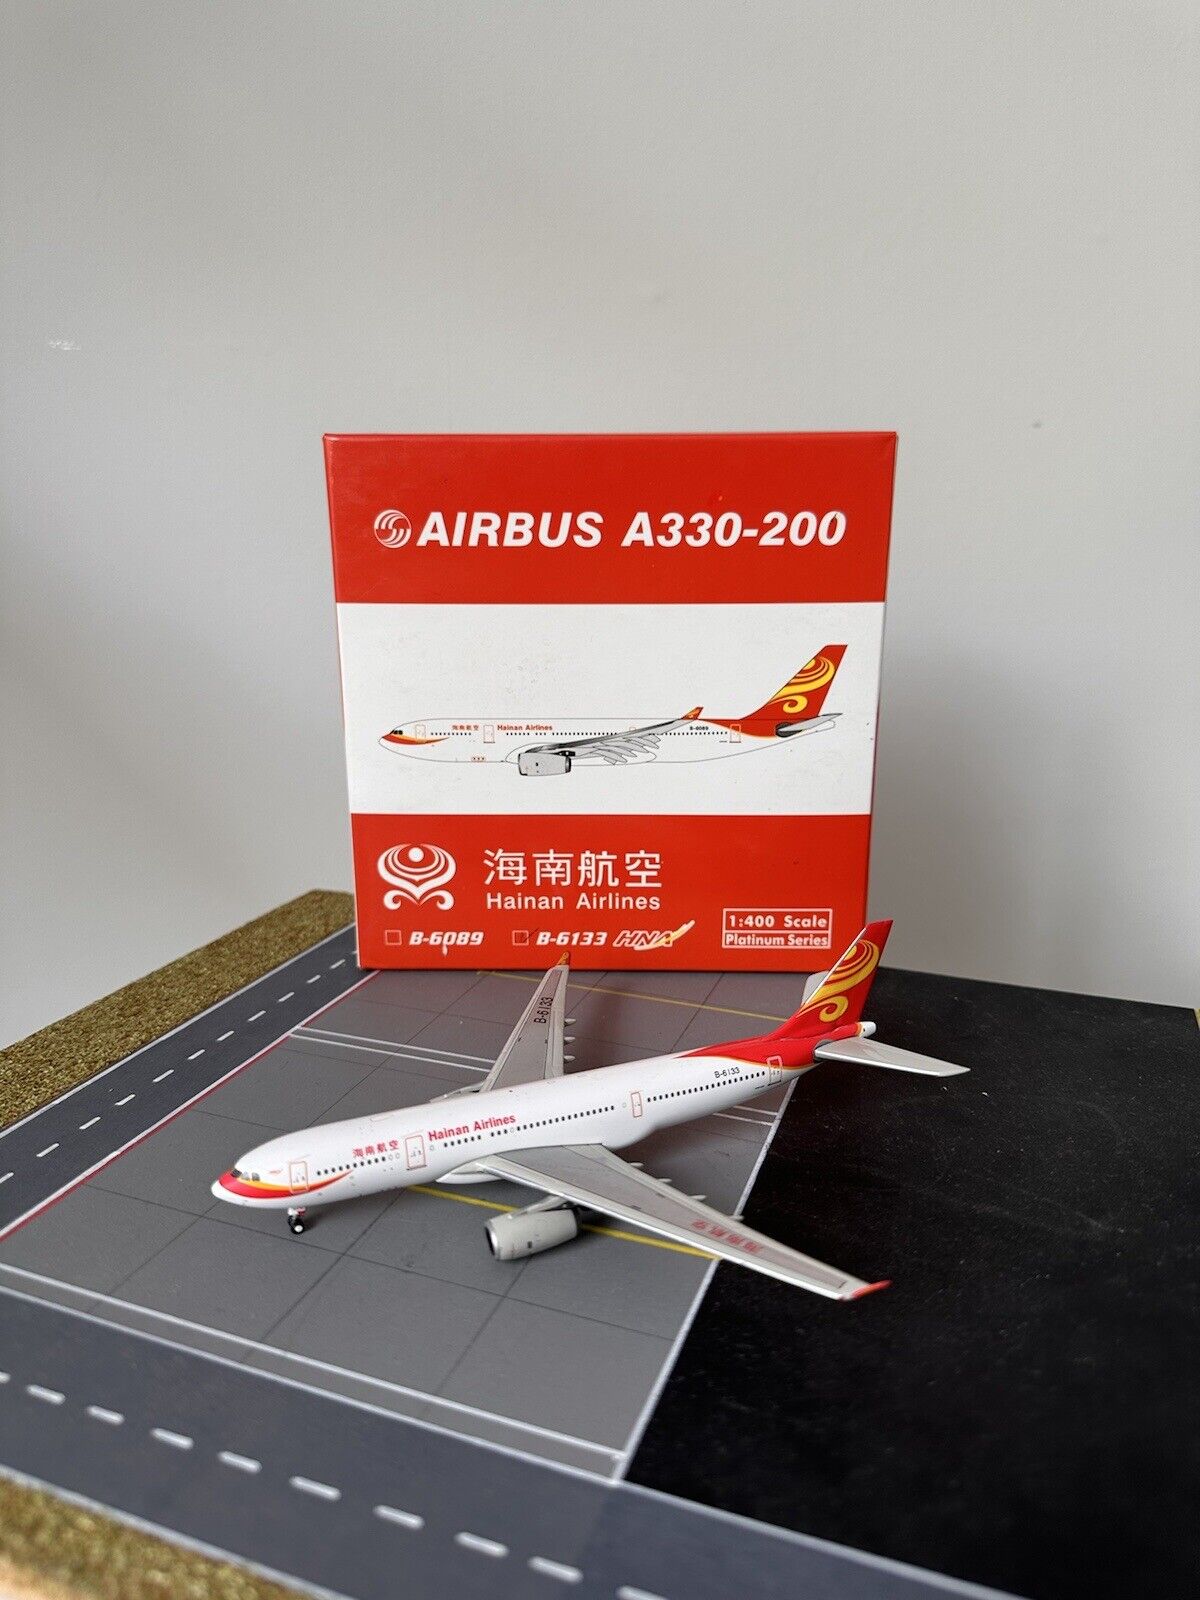 Hainan Airlines Airbus A330-200 B-6089 1:400 Scale Model By Phoenix